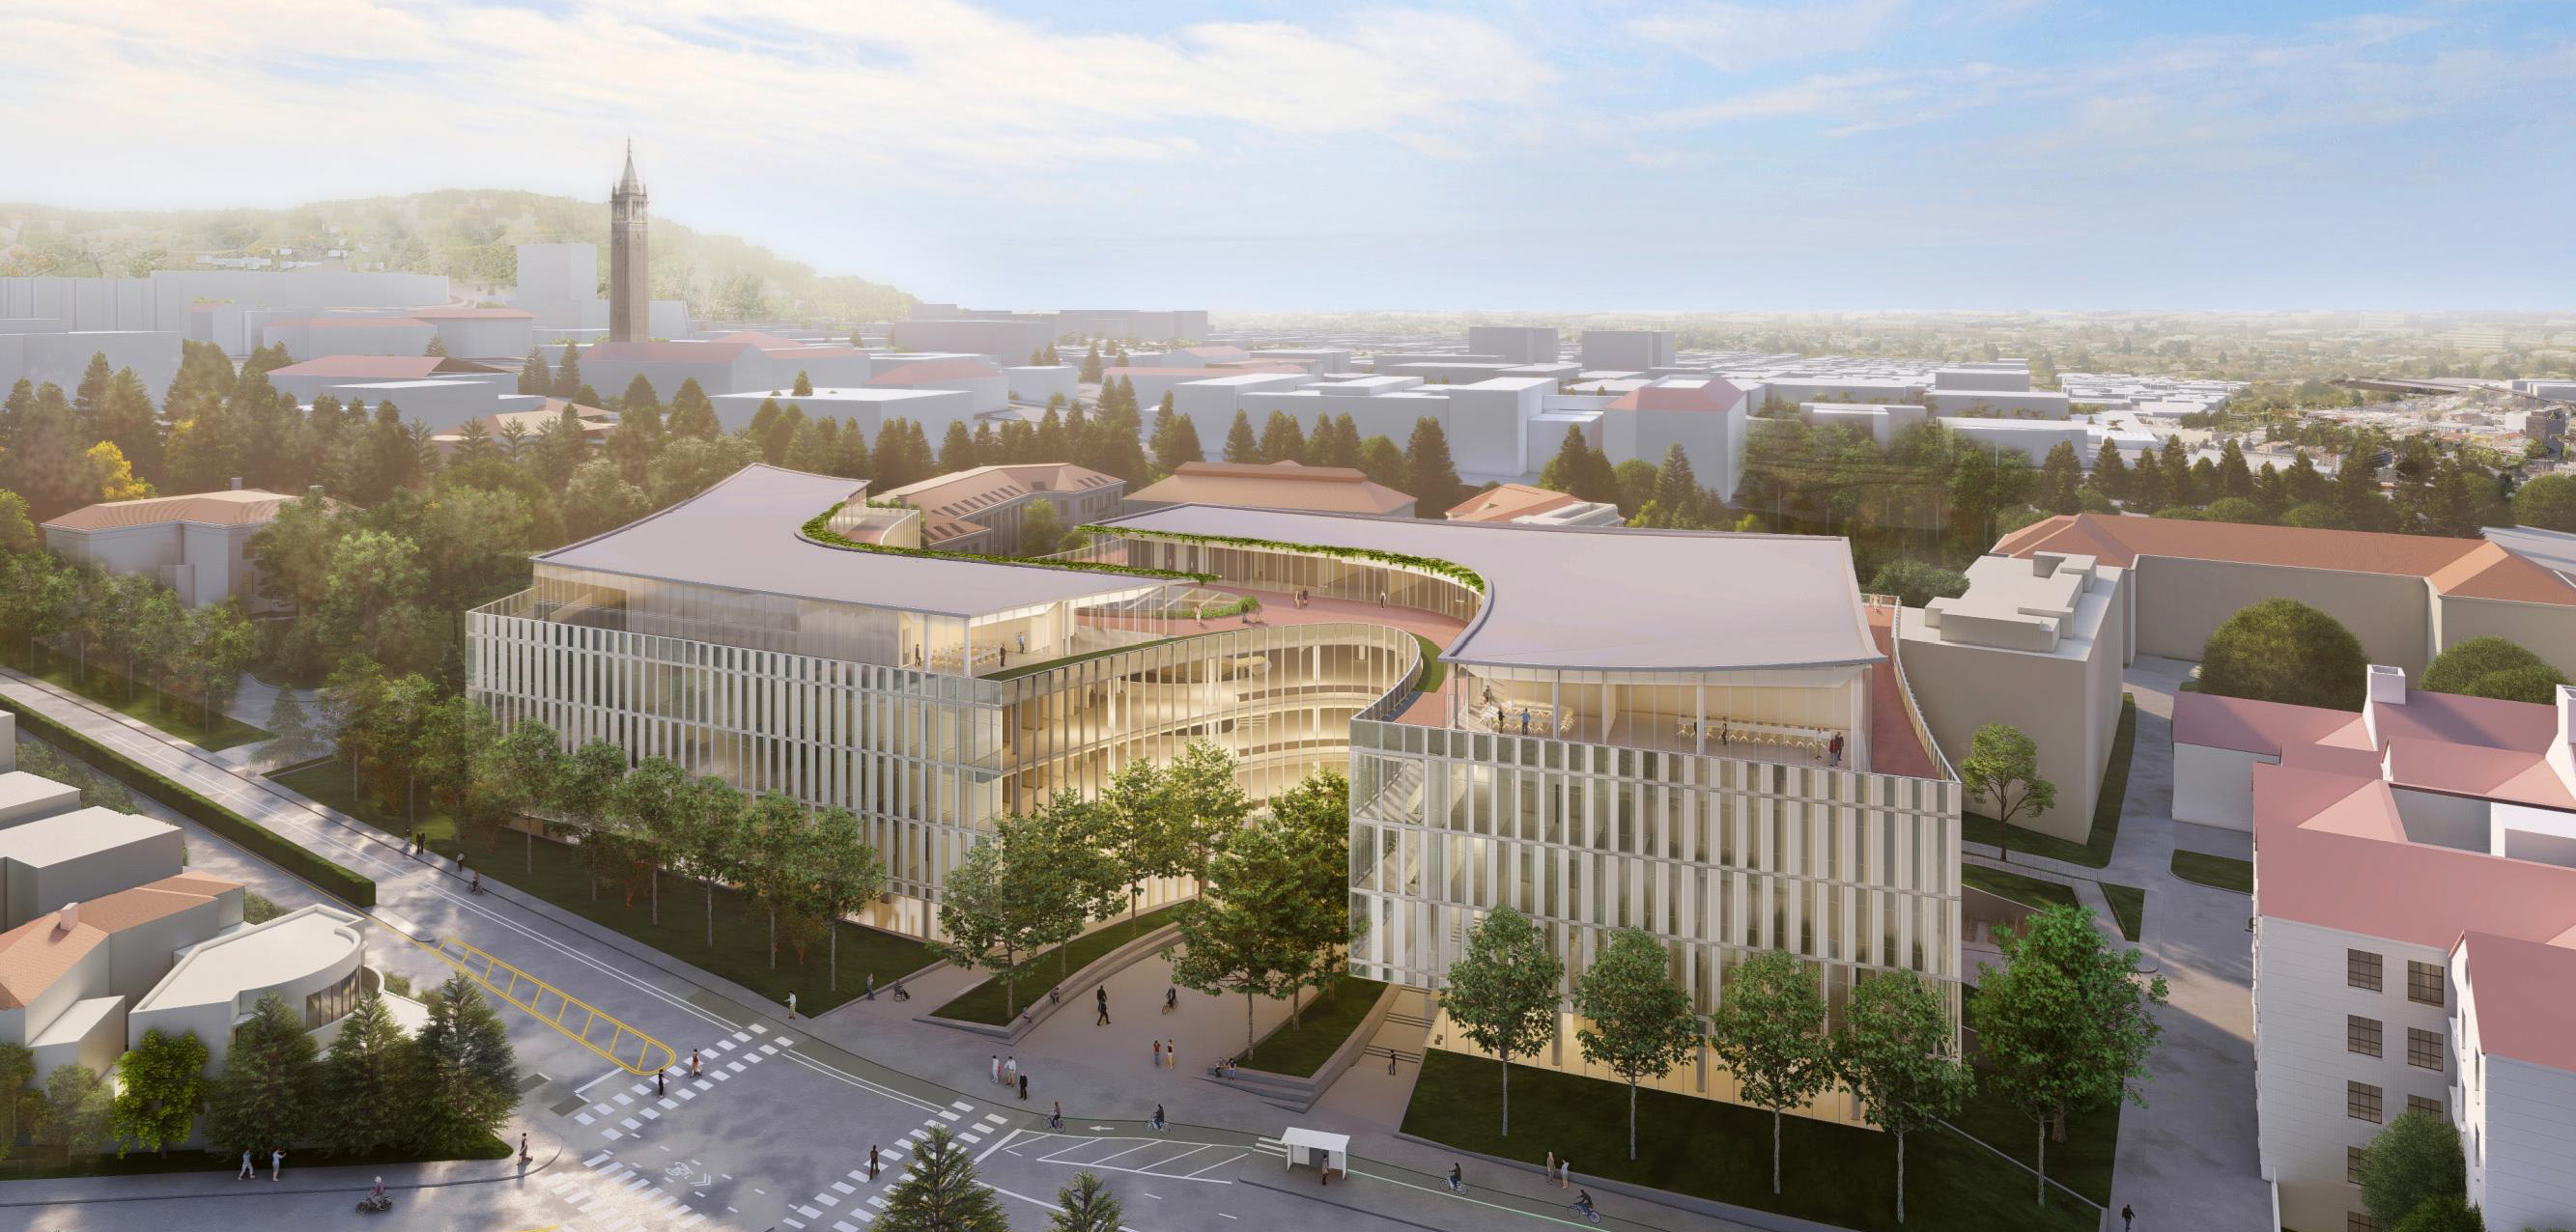 The Gateway building will be located on the UC Berkeley campus at the intersection of Hearst Avenue and Arch Street. (Rendering by Weiss/Manfredi architecture firm)